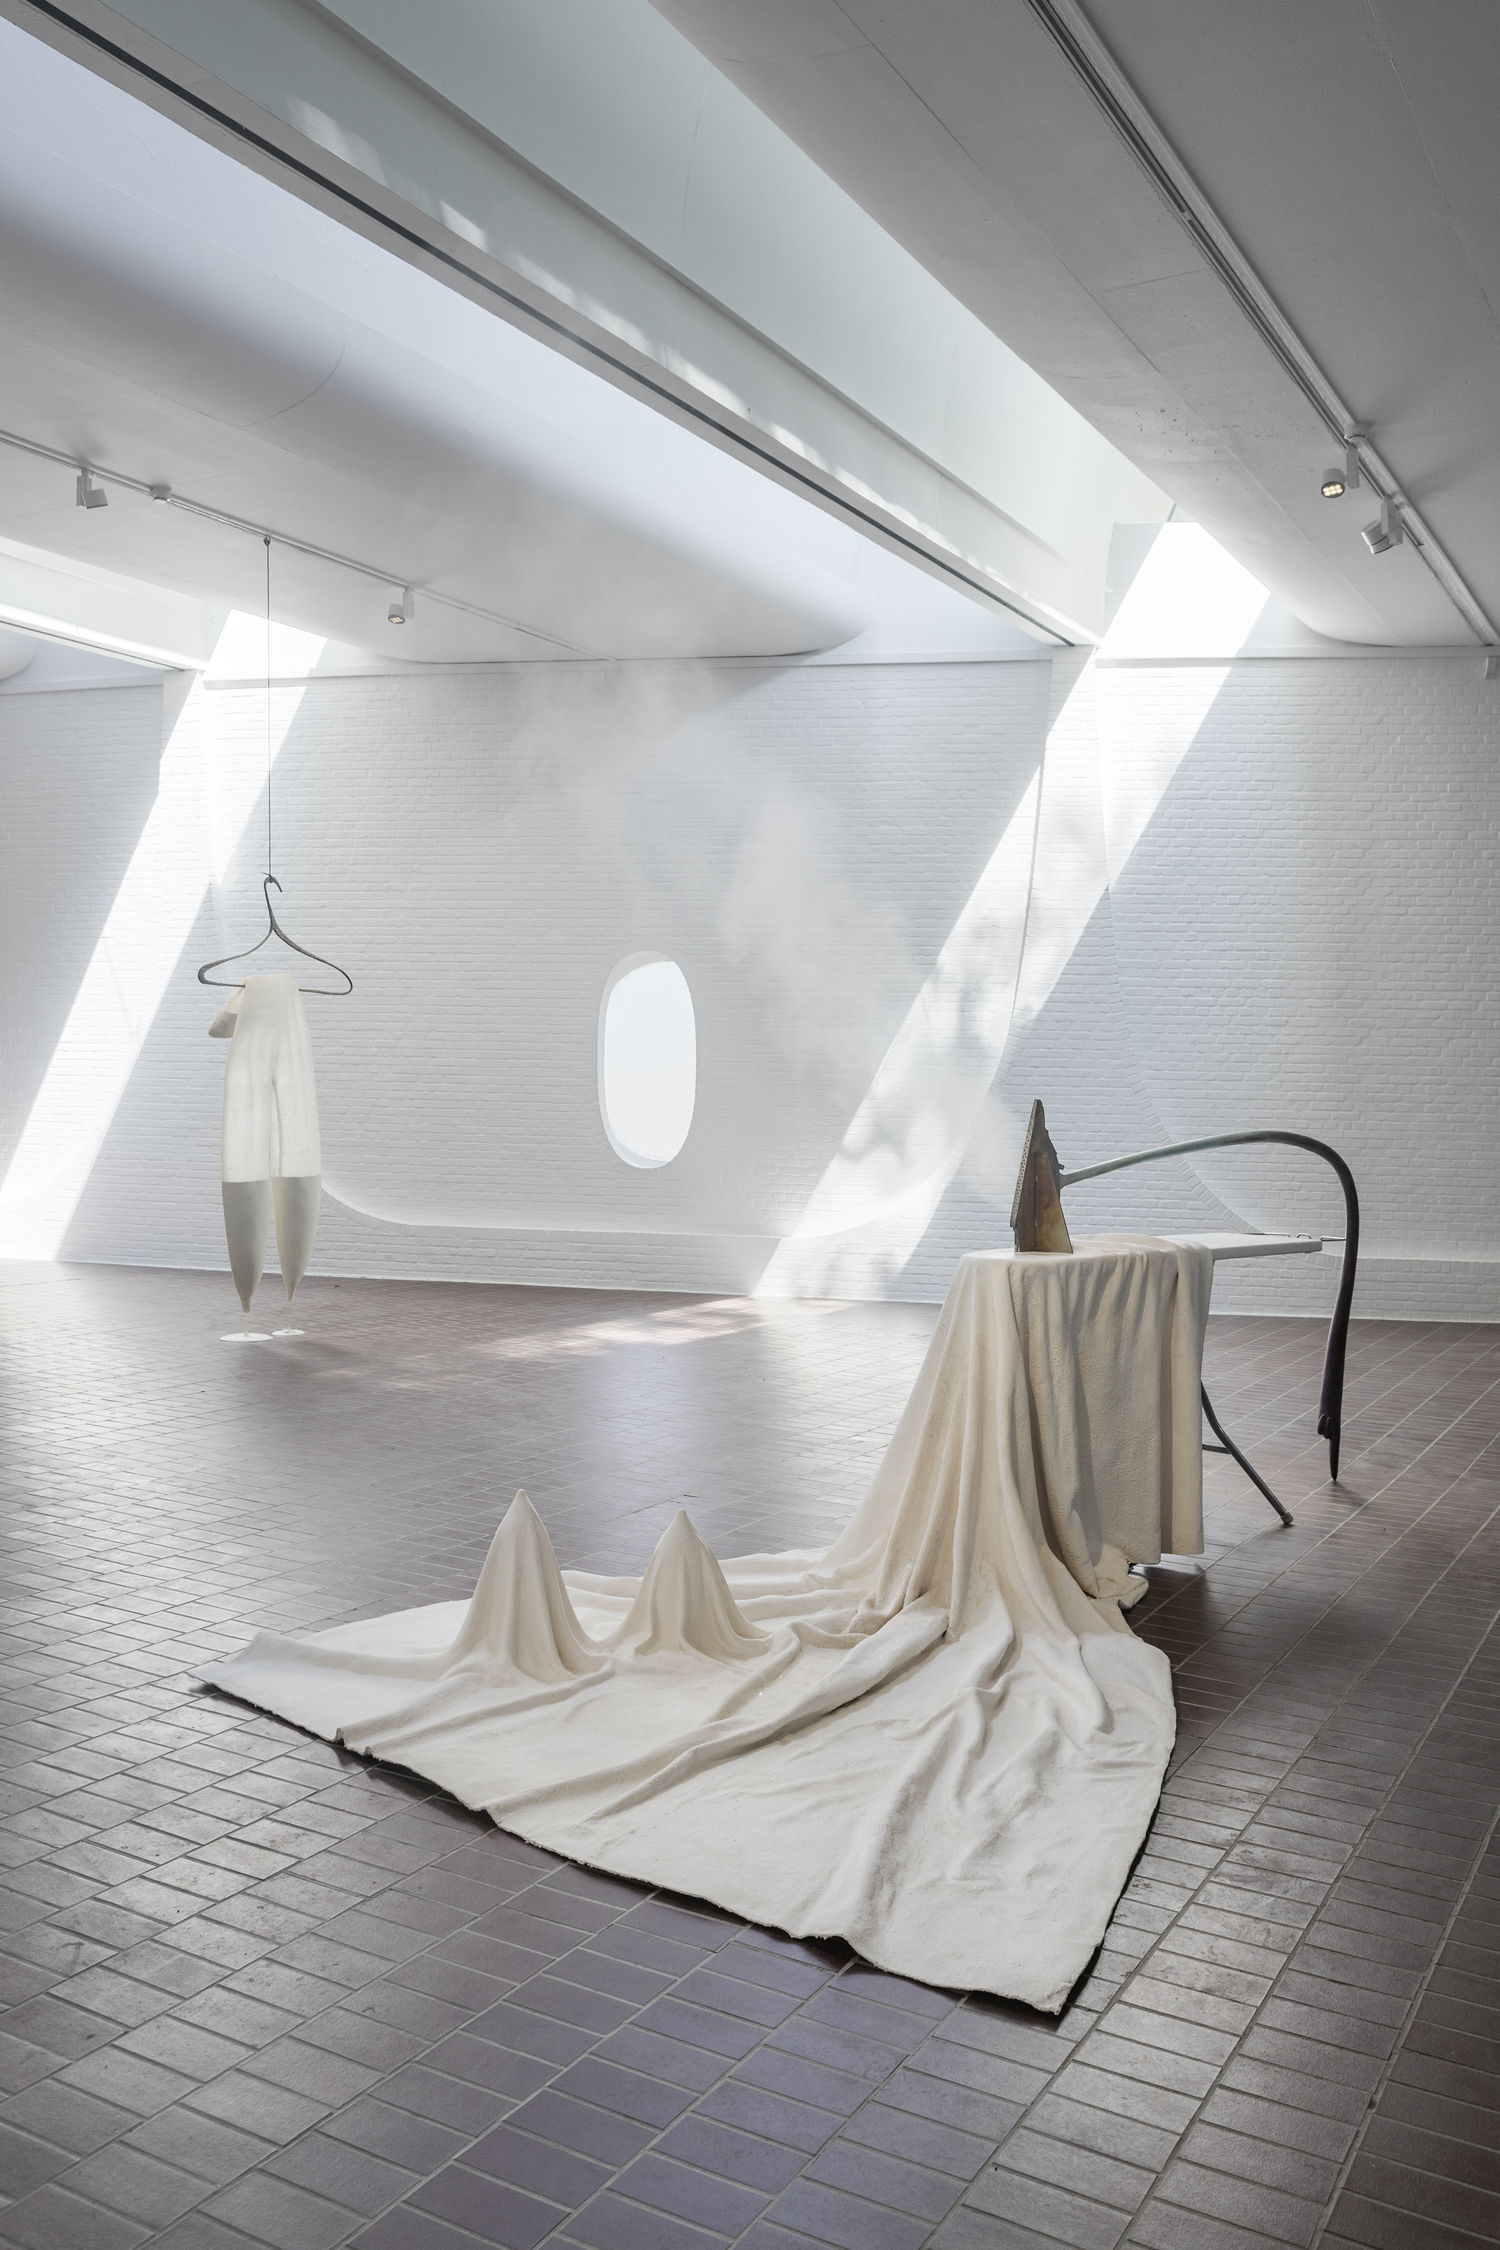 Camille Henrot, Iron Deficiency, 2021 - A Free Quote, 2021 © ADAGP Camille Henrot. Courtesy of the artist, kamel mennour and Hauser & Wirth. Photo: Ans Brys